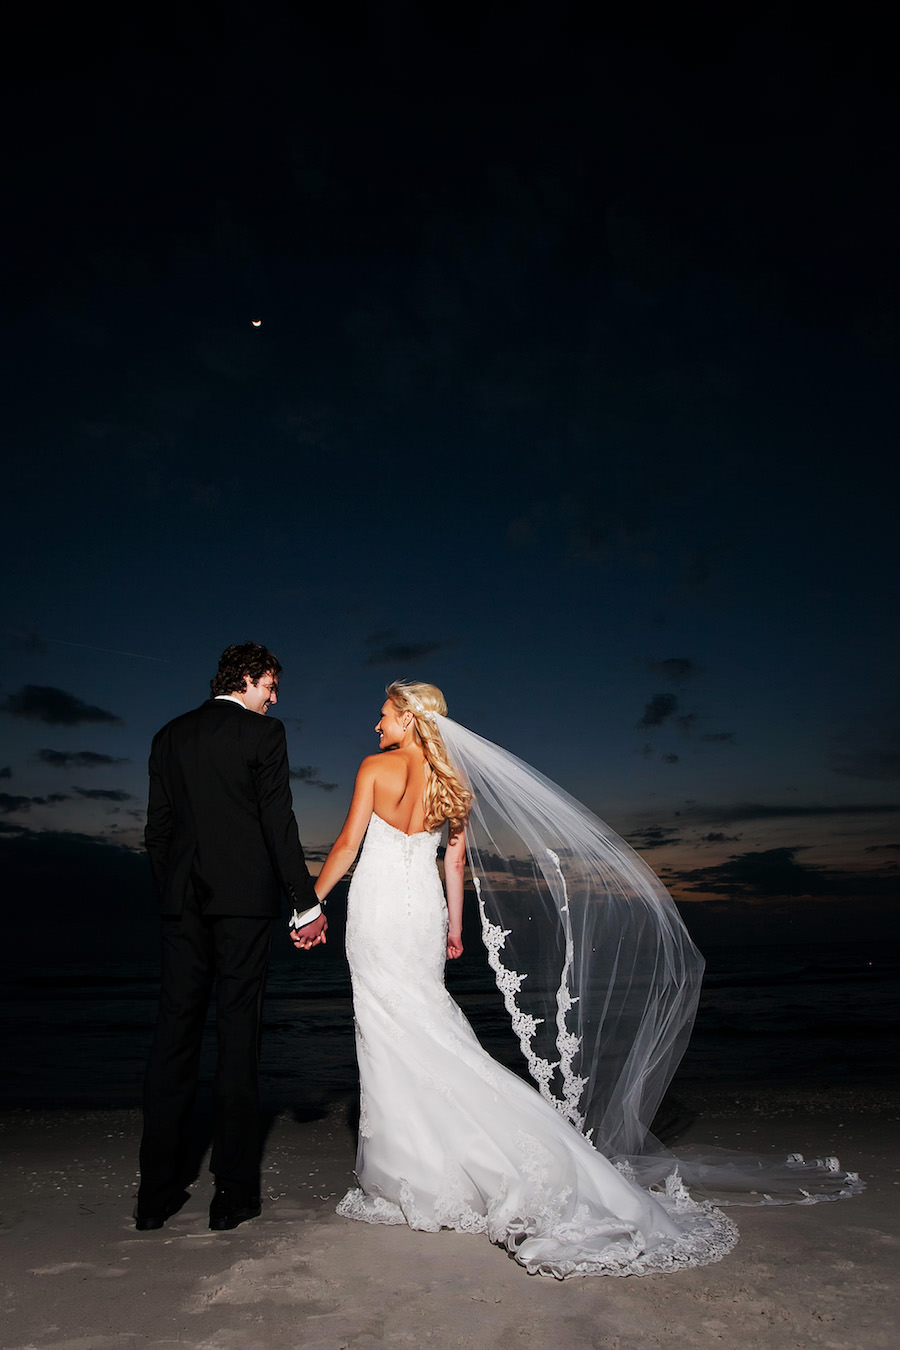 Bride and Groom Outdoor Clearwater Beach Wedding Portrait | Photography By Limelight Photography